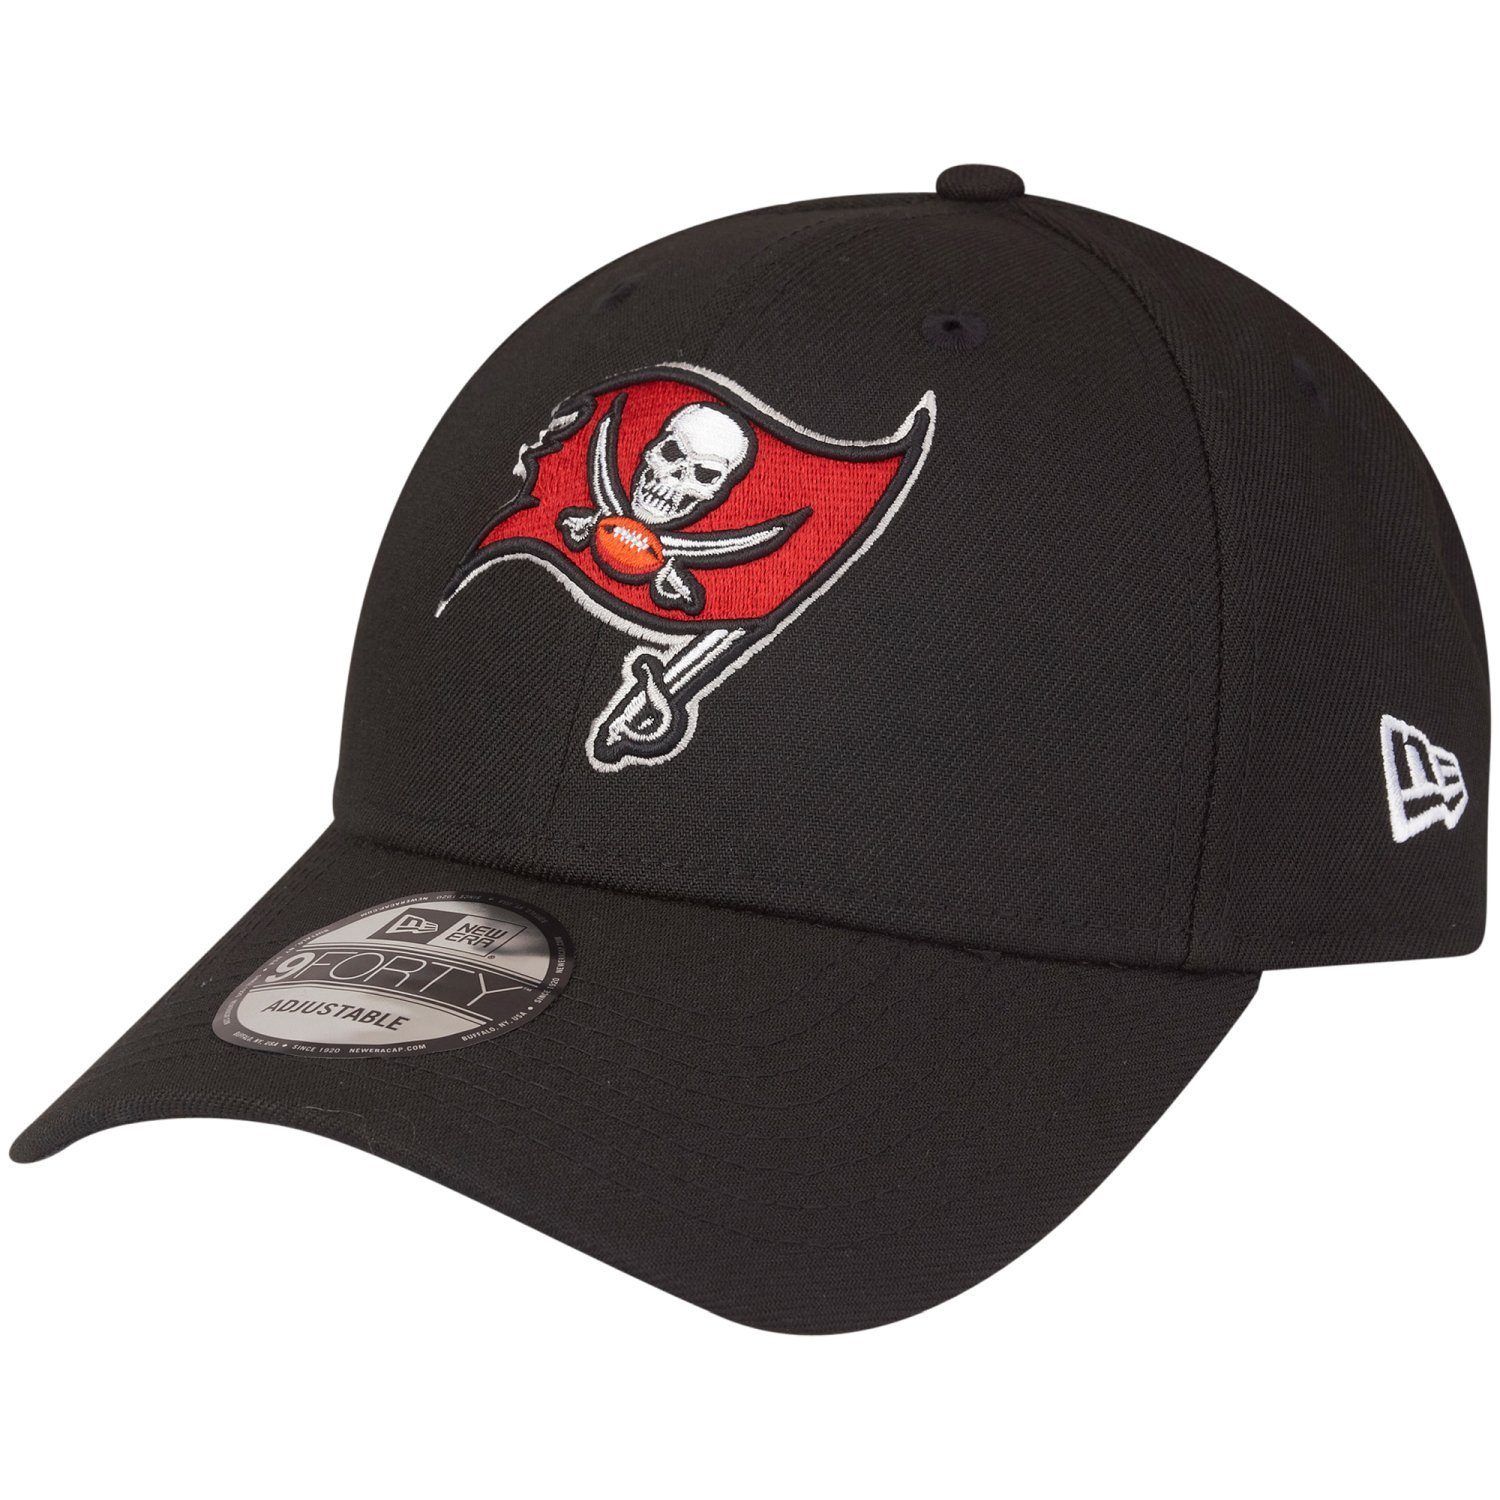 New Era Baseball Cap 9Forty Curved NFL Teams Tampa Bay Buccaneers